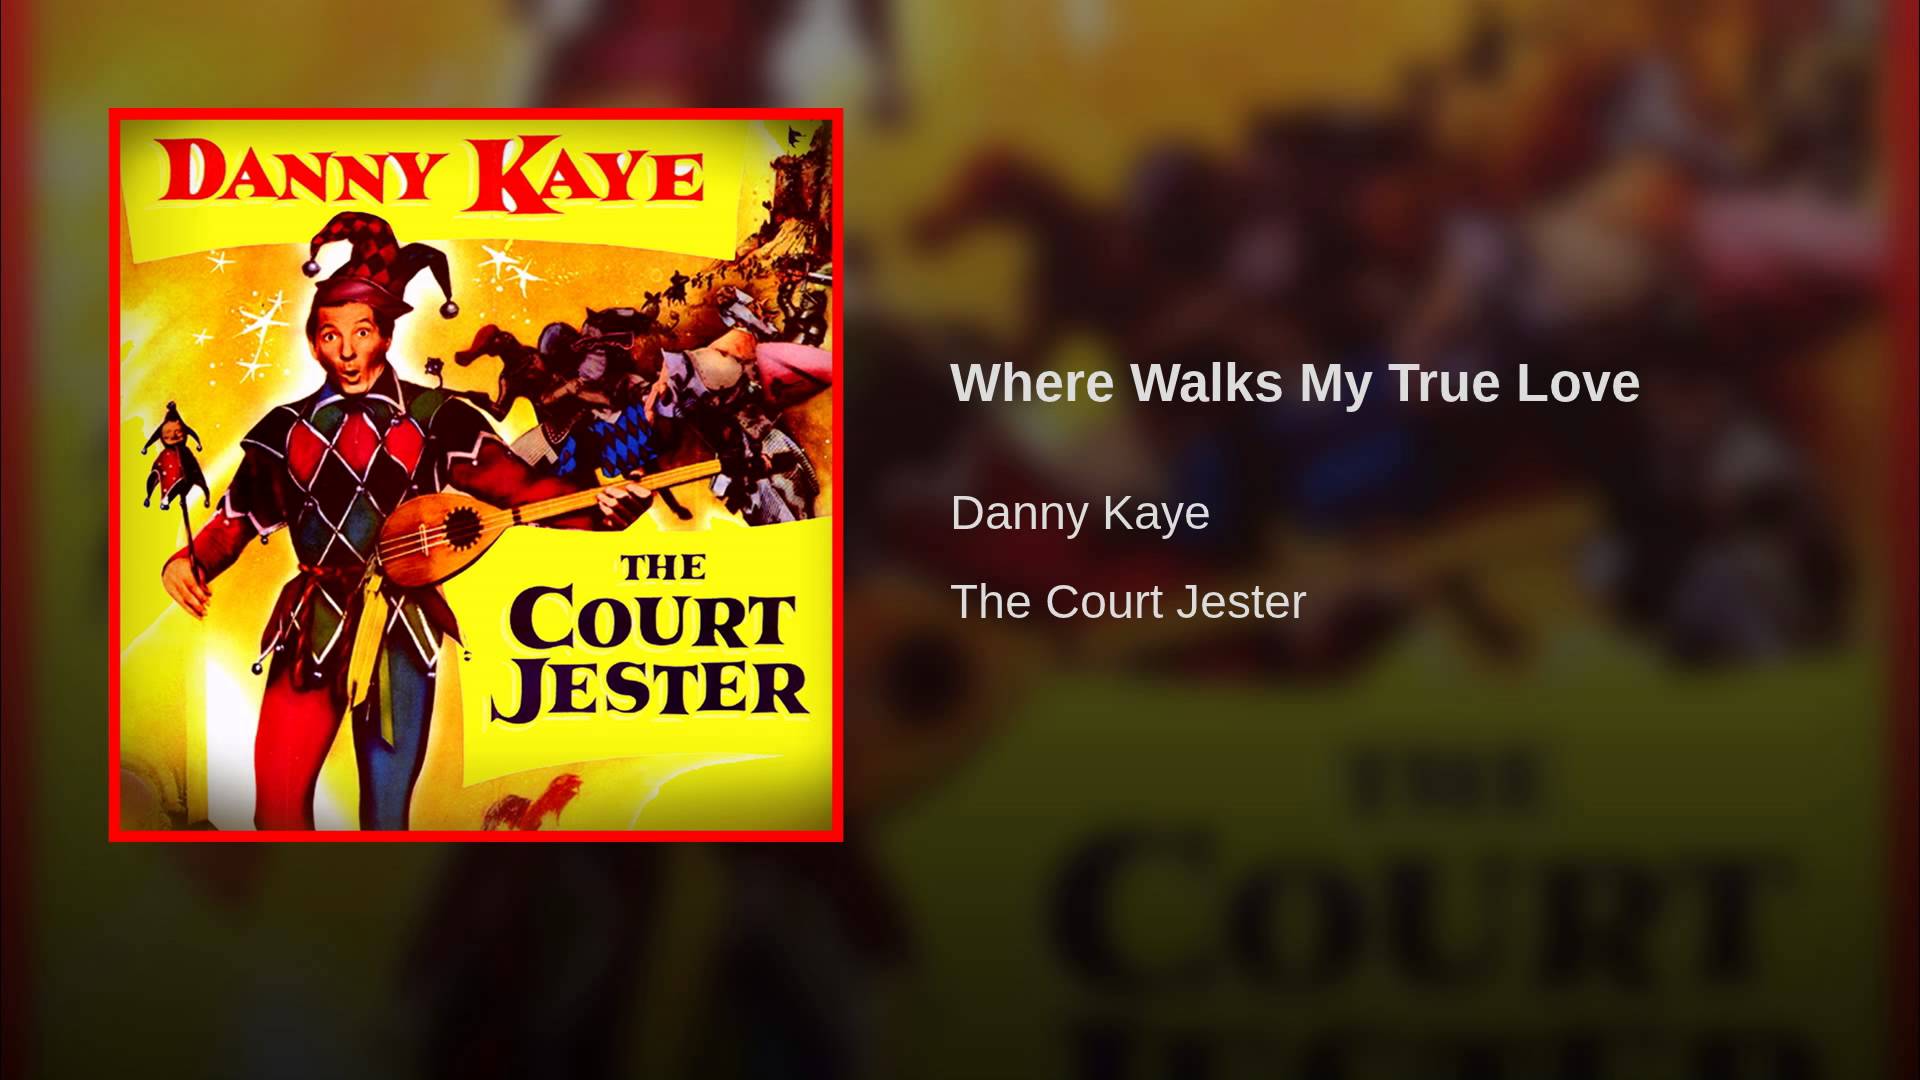 Where Walks My True Love, as recorded by Danny Kaye for The Court Jester